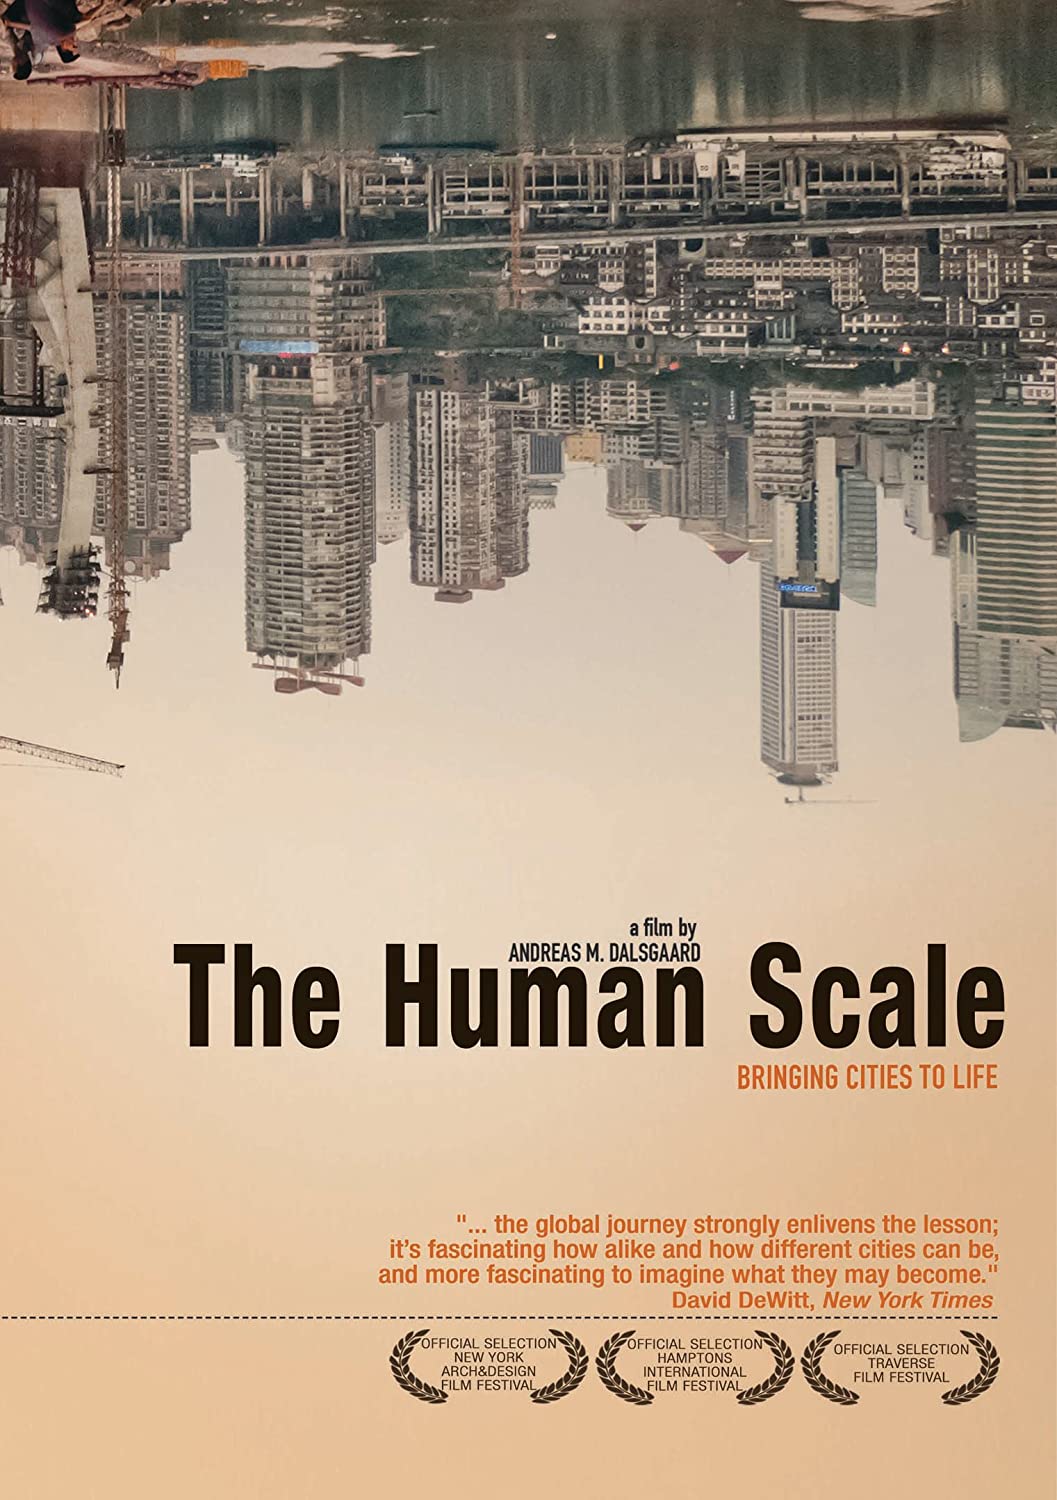 The Human Scale: Bringing Cities to Life